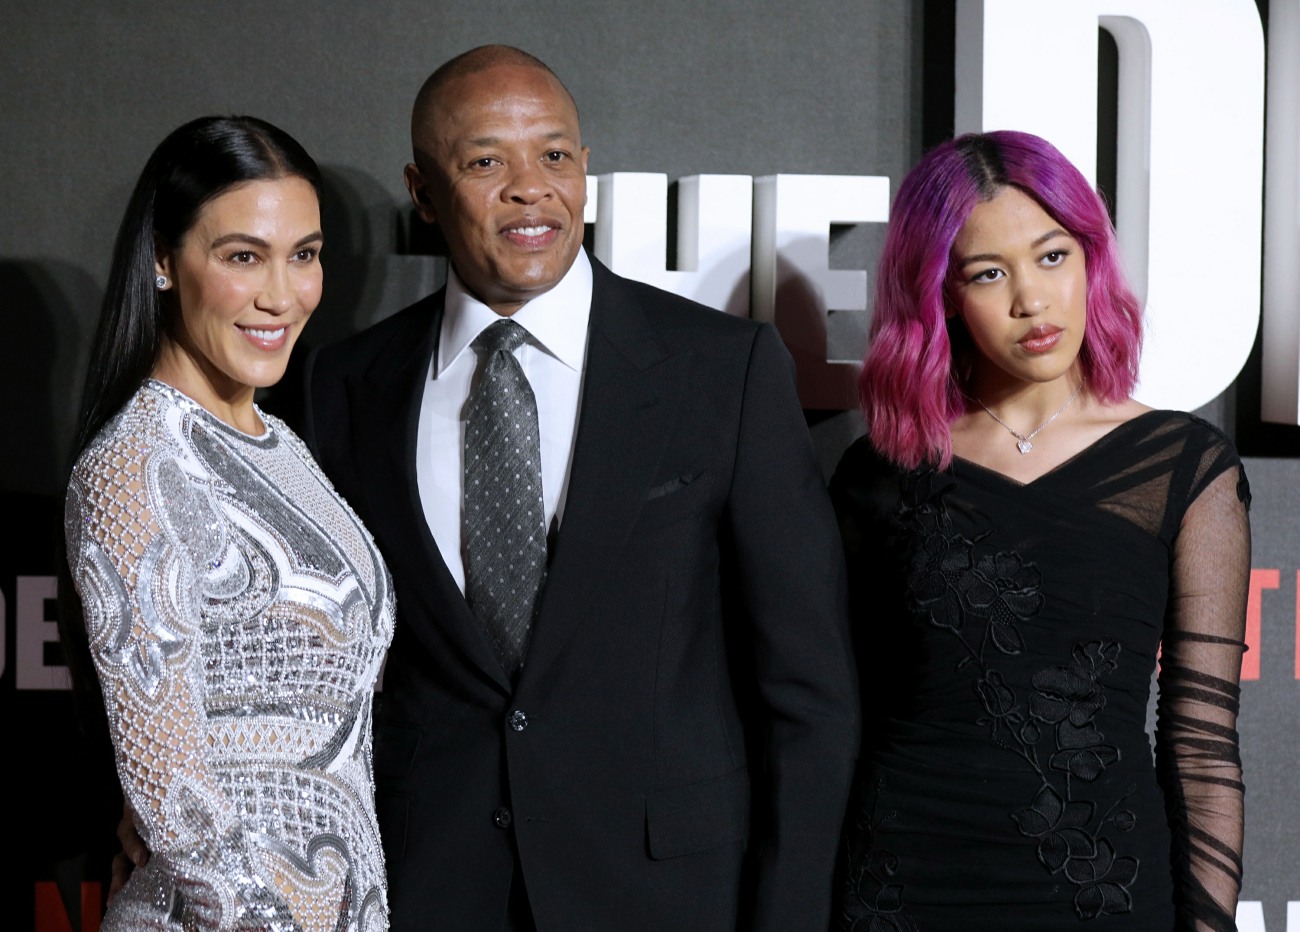 Nicole Threatt, Dr Dre and Truly Young at 'The Defiant Ones' Screening in London